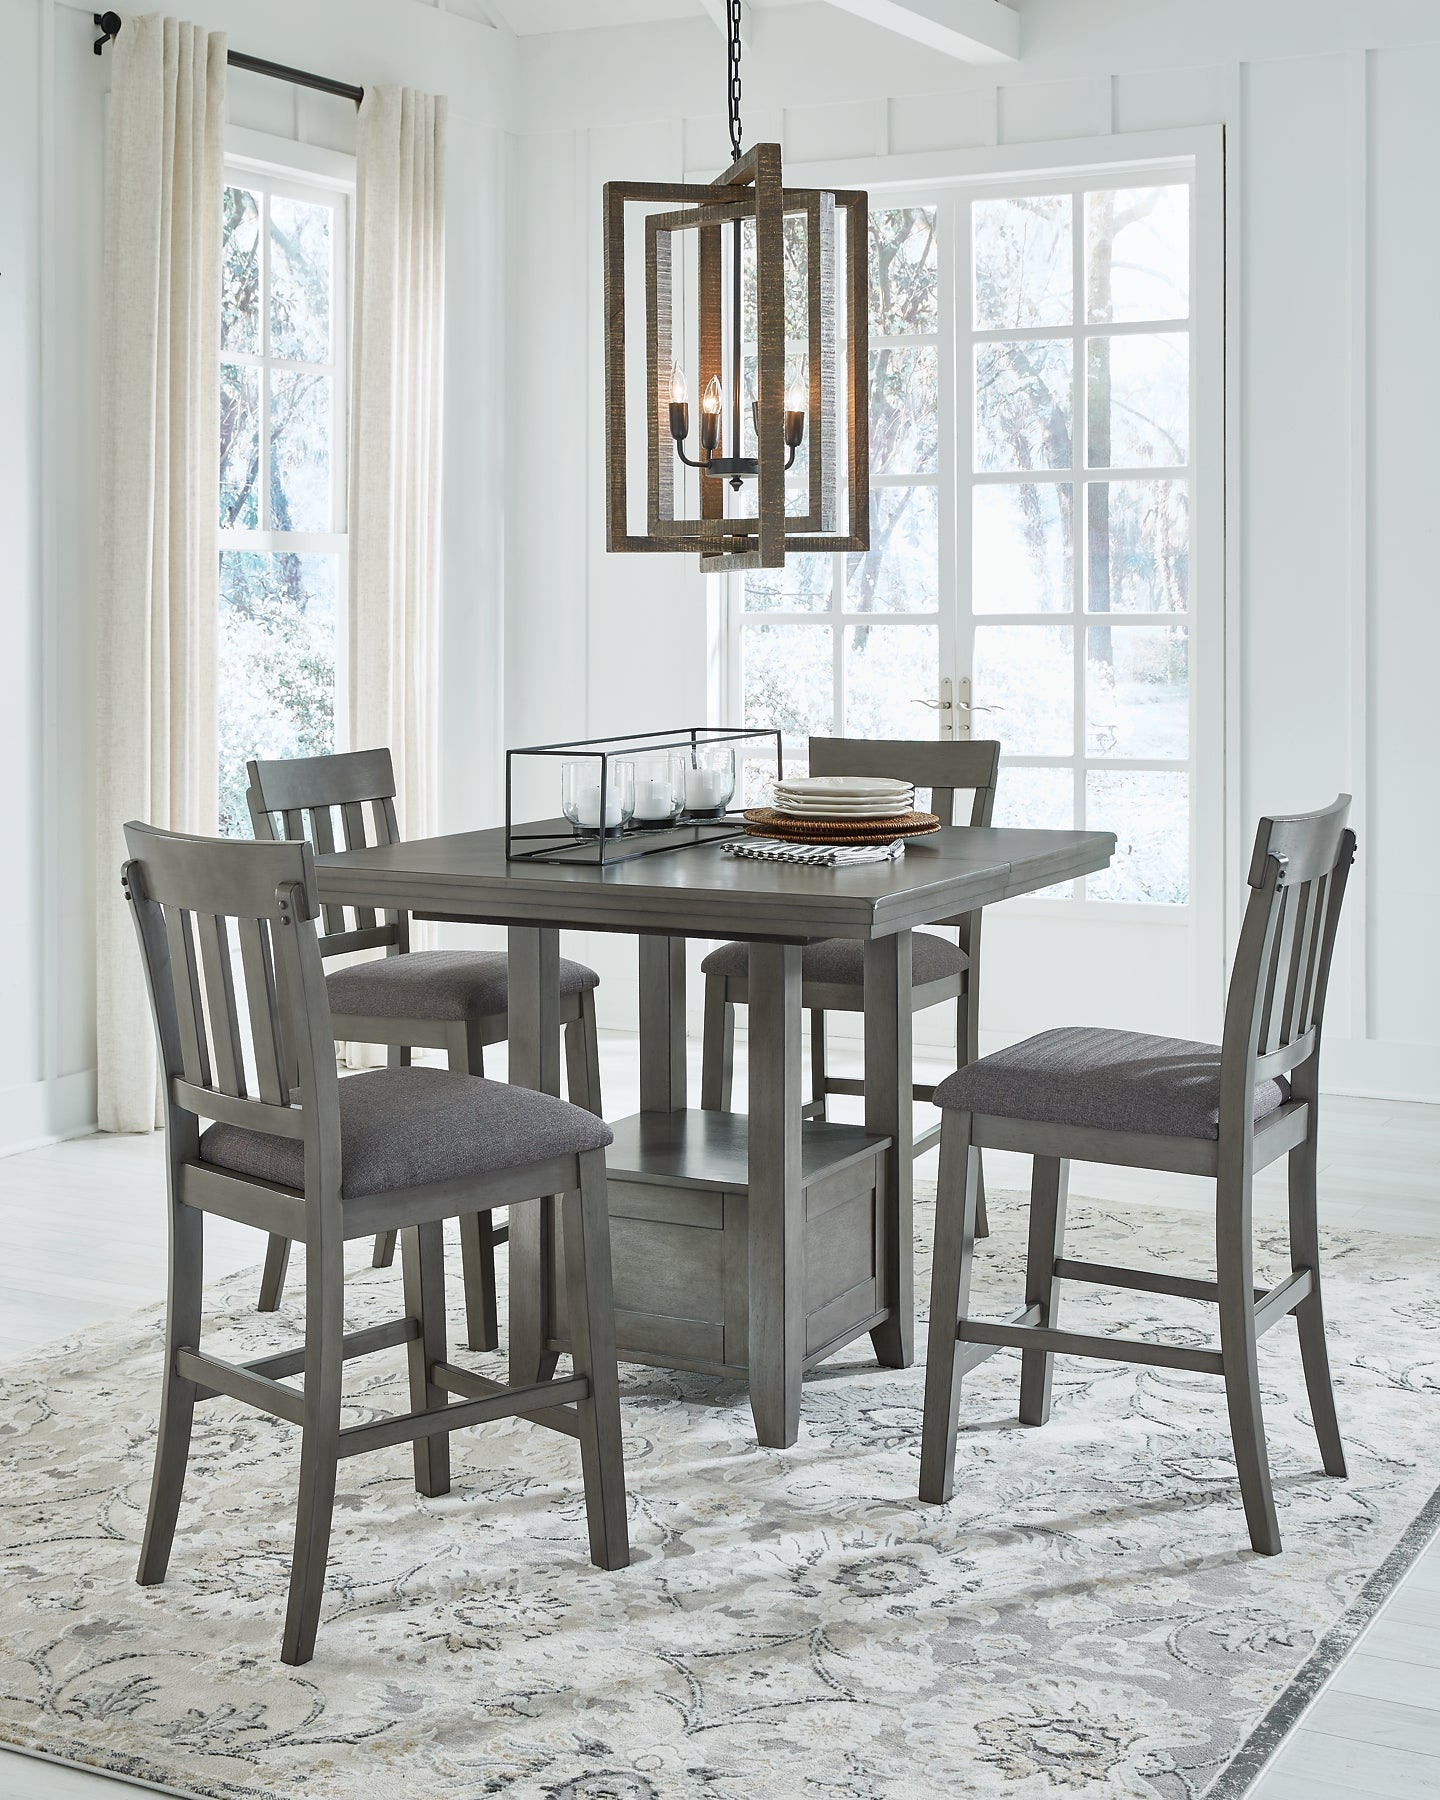 Hallanden Counter Height Dining Table and 4 Barstools with Storage Wilson Furniture (OH)  in Bridgeport, Ohio. Serving Bridgeport, Yorkville, Bellaire, & Avondale